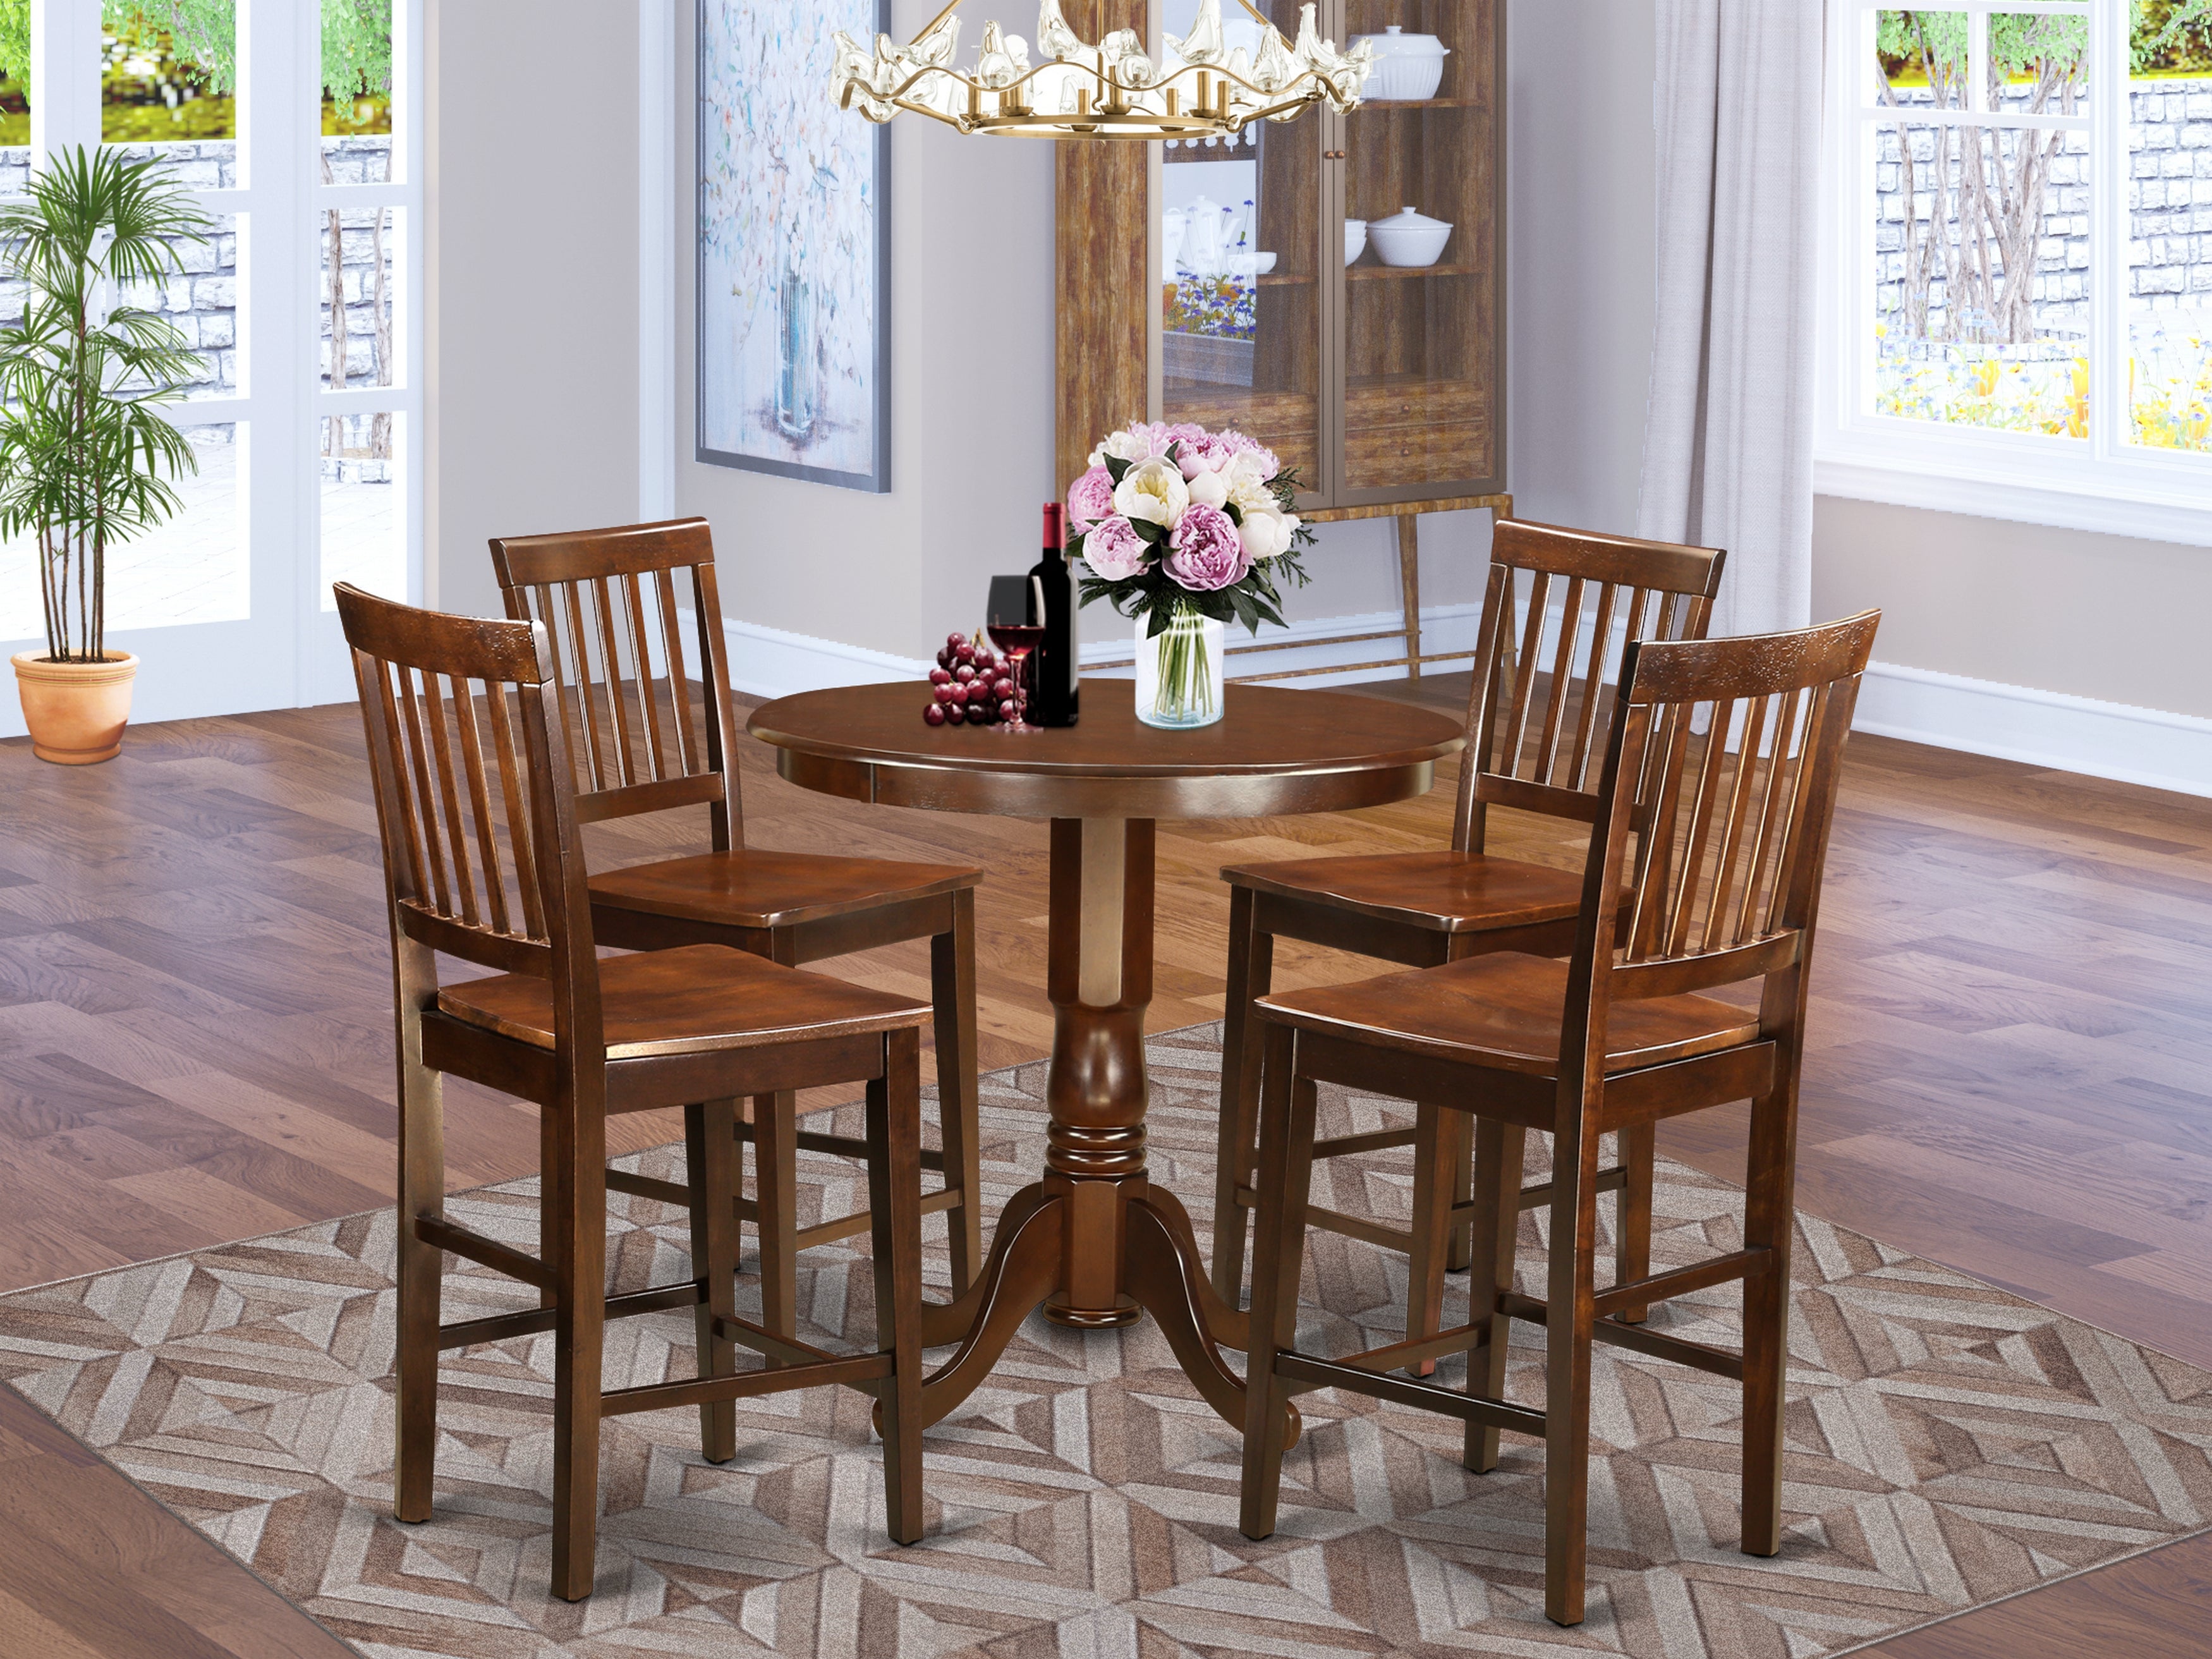 JAVN5-MAH-W 5 Pc Dining counter height set-pub Table and 4 Dining Chairs.